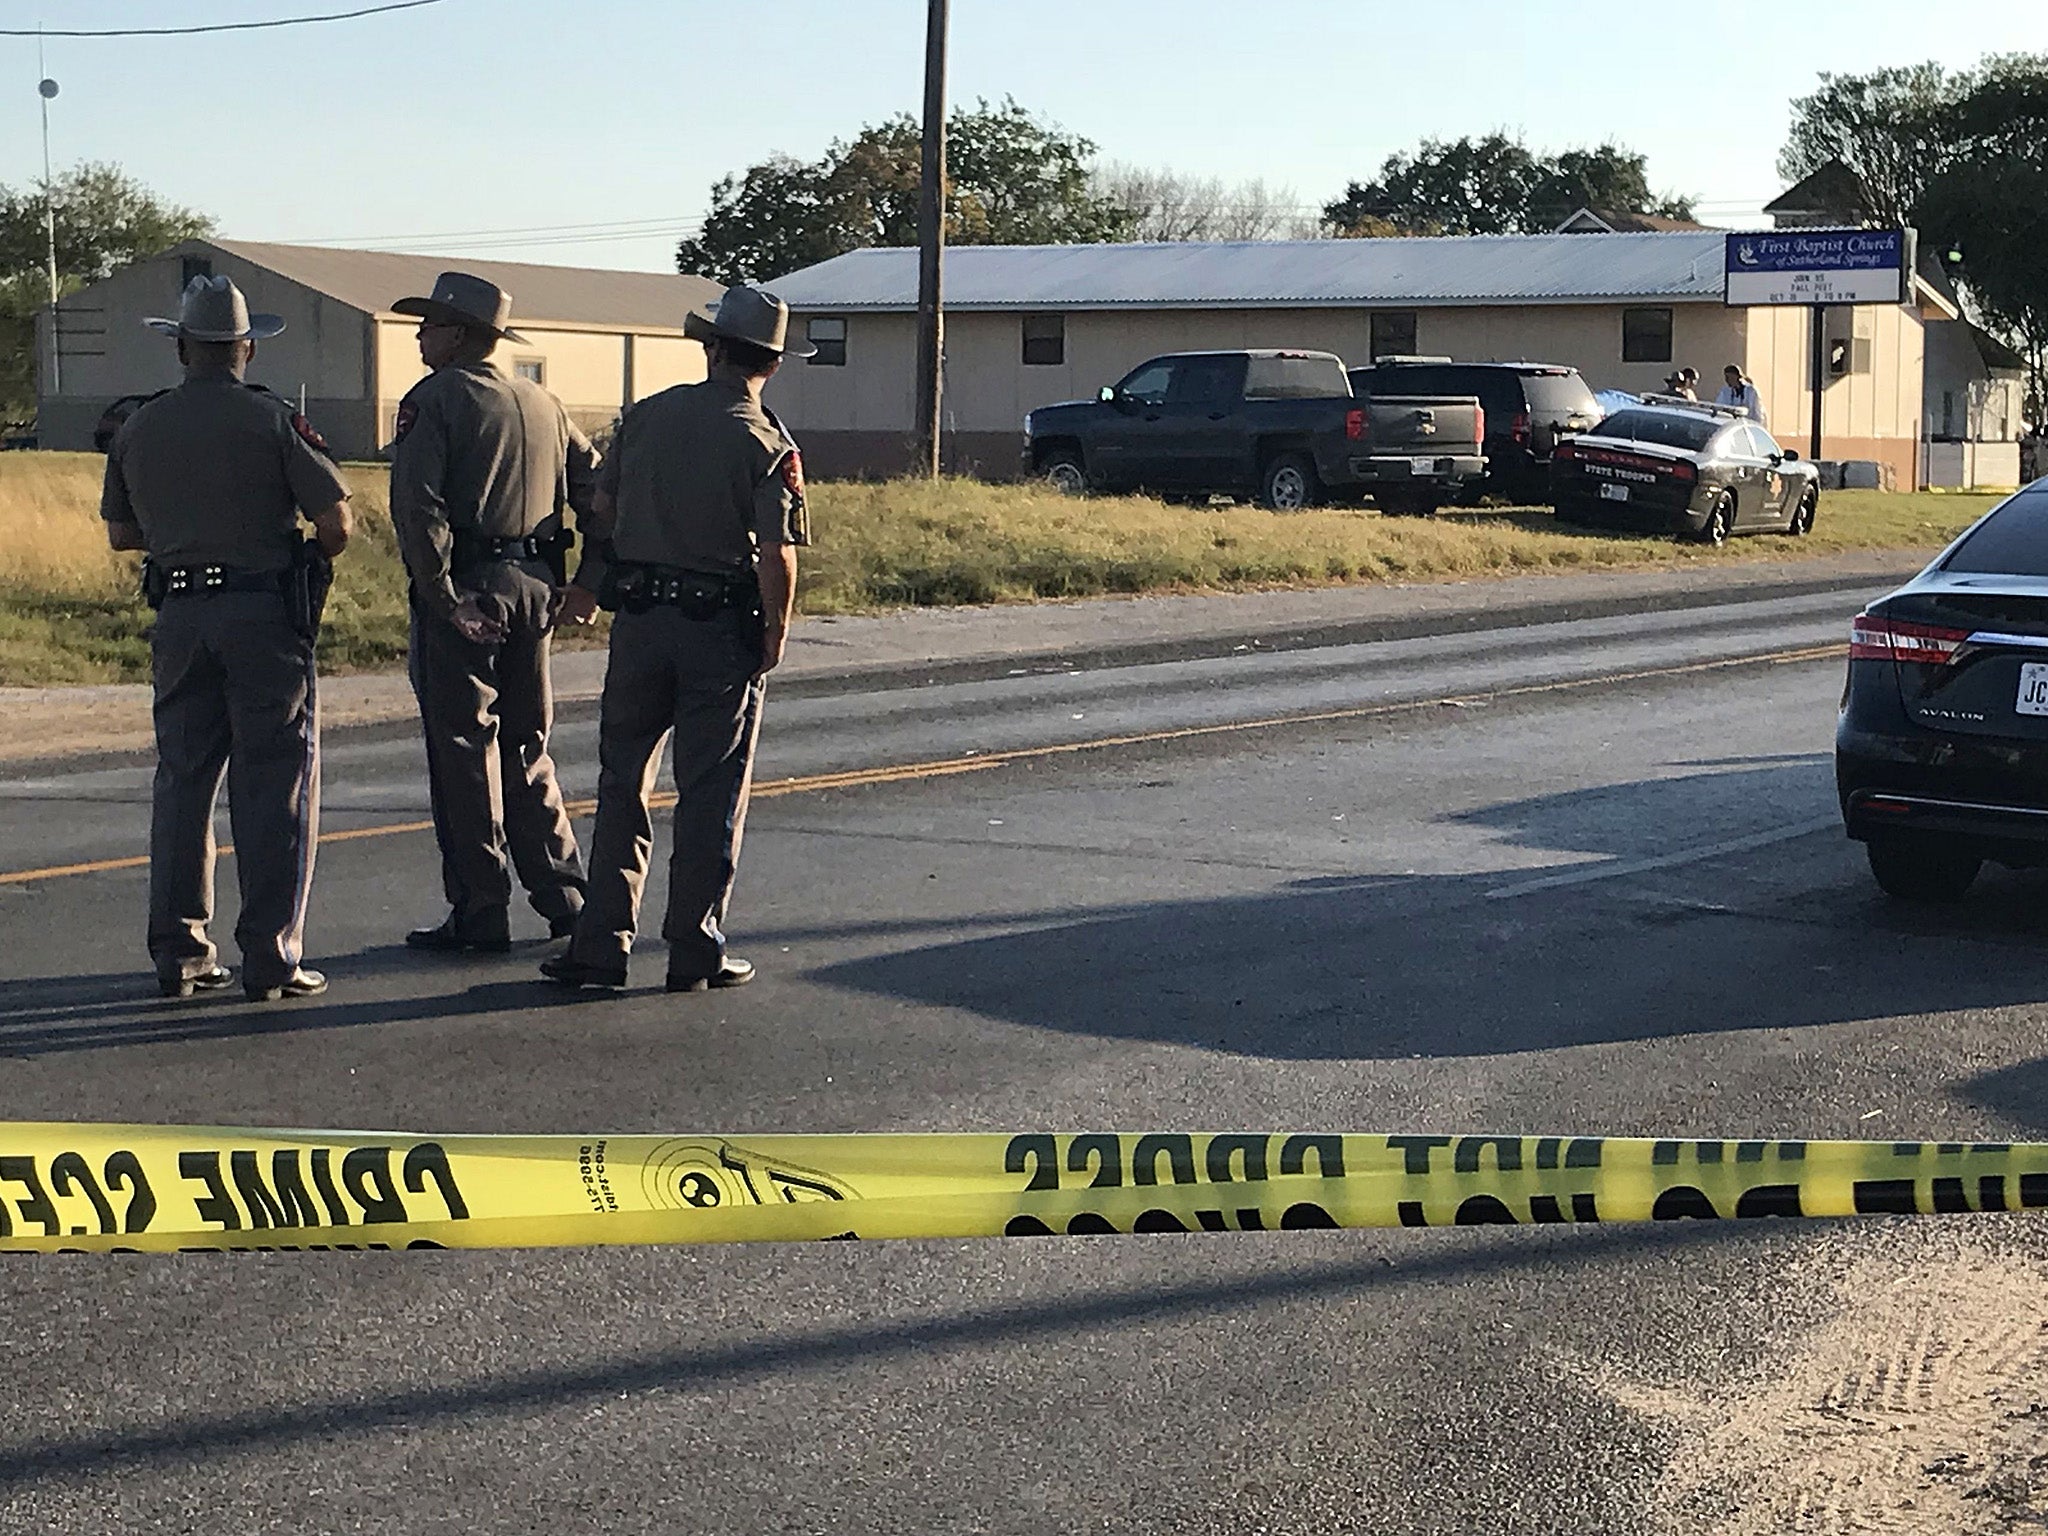 Up to 26 people are thought to have died in the Texas church shooting